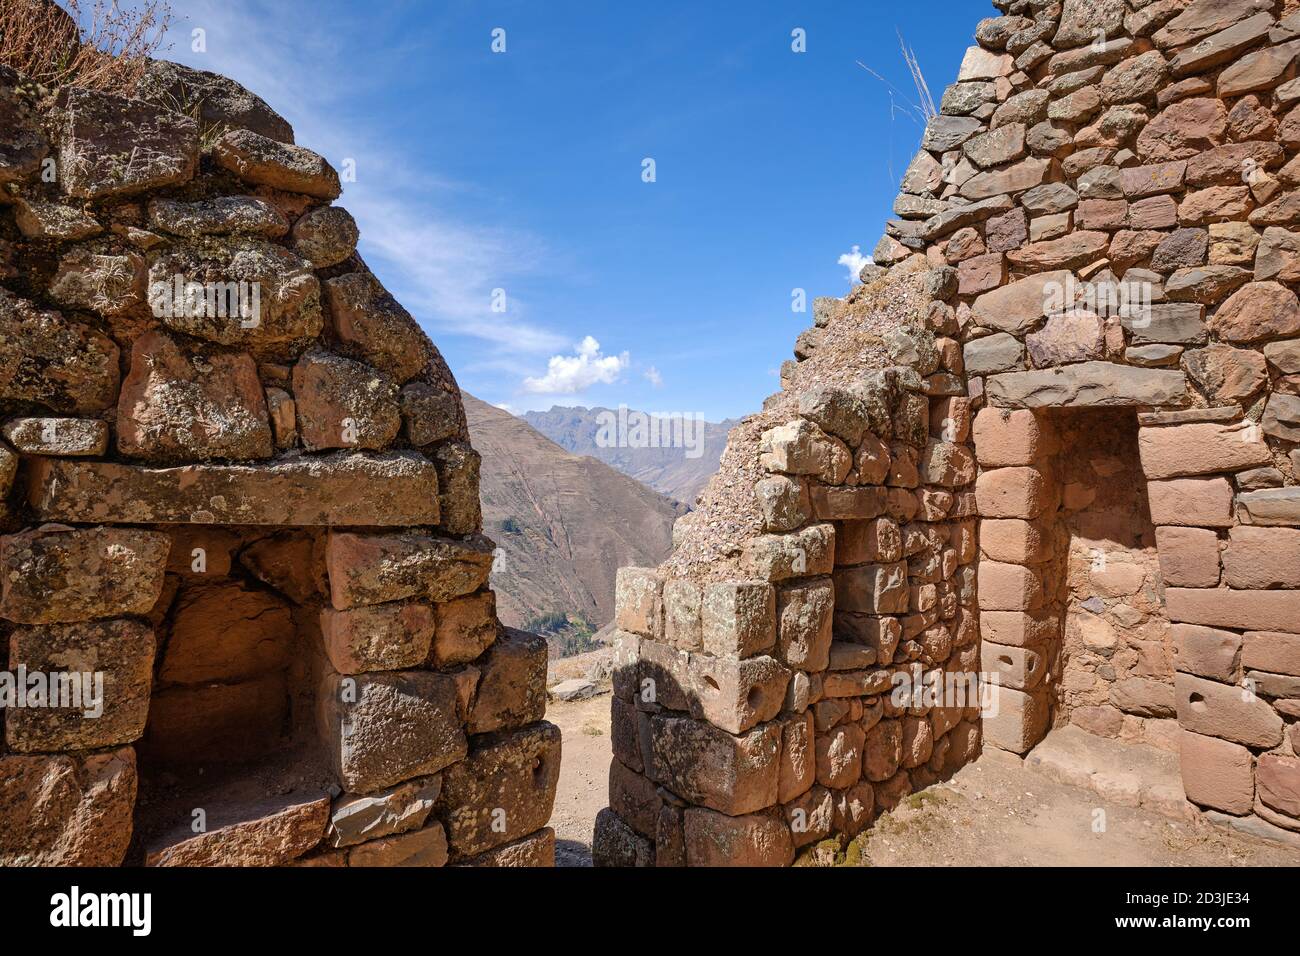 The armoury at Pisac Pisaq Incan site showing recesses for storage of weapons like spears Stock Photo